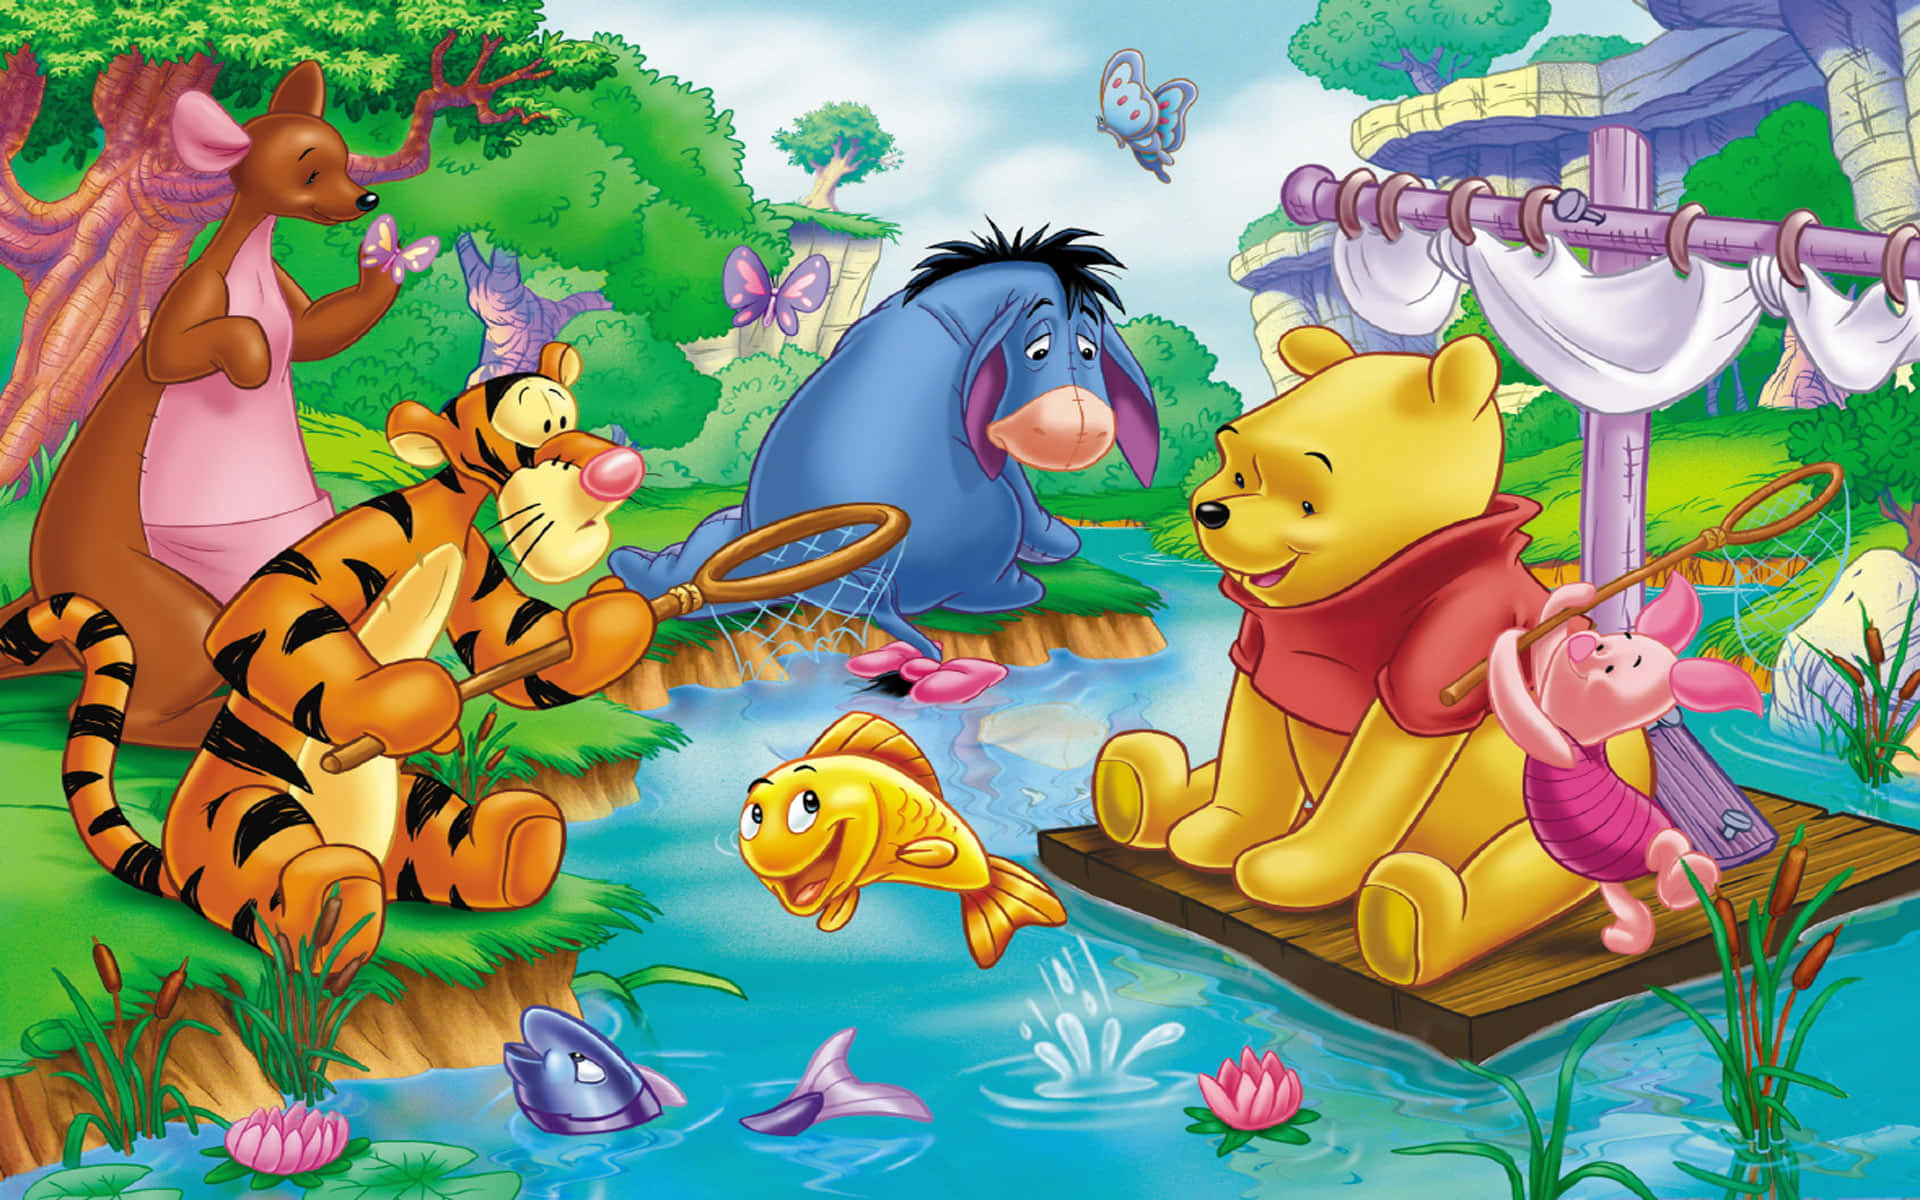 Enjoy Sweet Moments With Winnie The Pooh On Your Desktop! Background